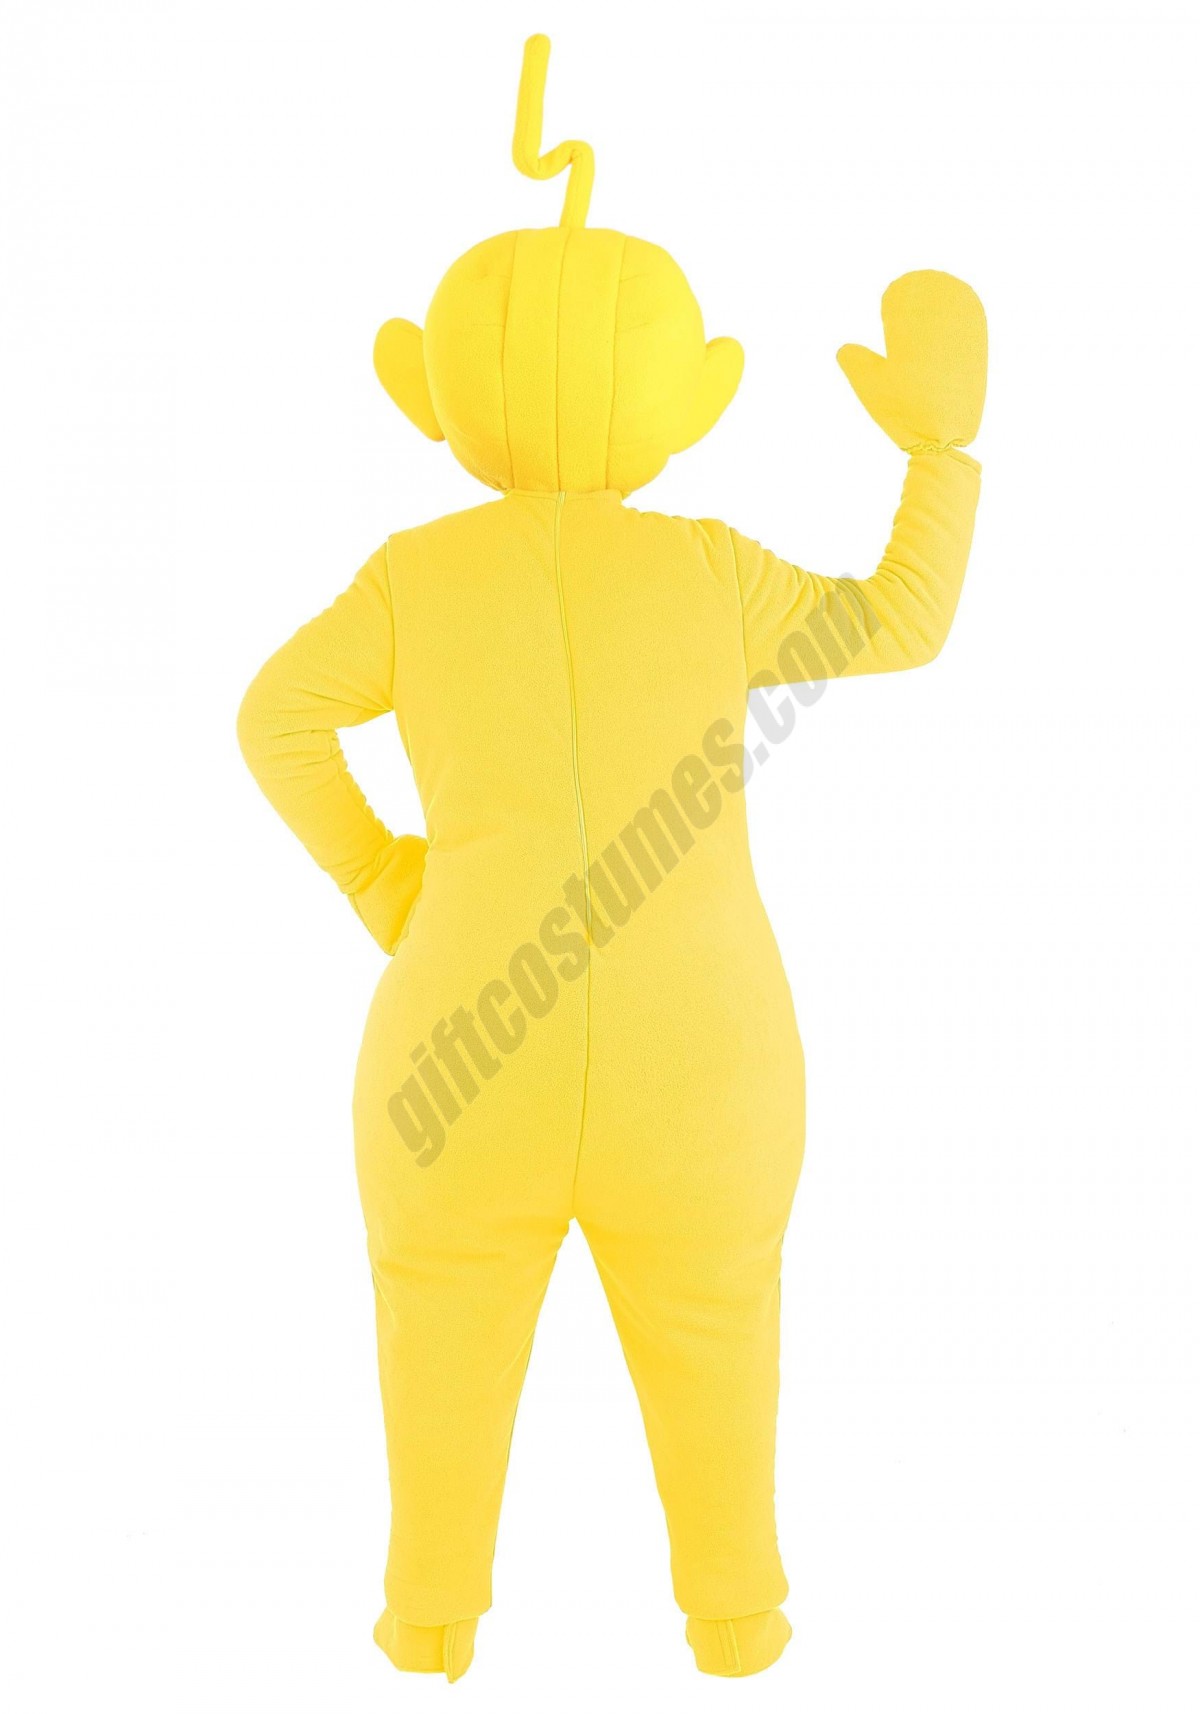 Plus Size Laa-Laa Teletubbies Costume for Adults Promotions - -1